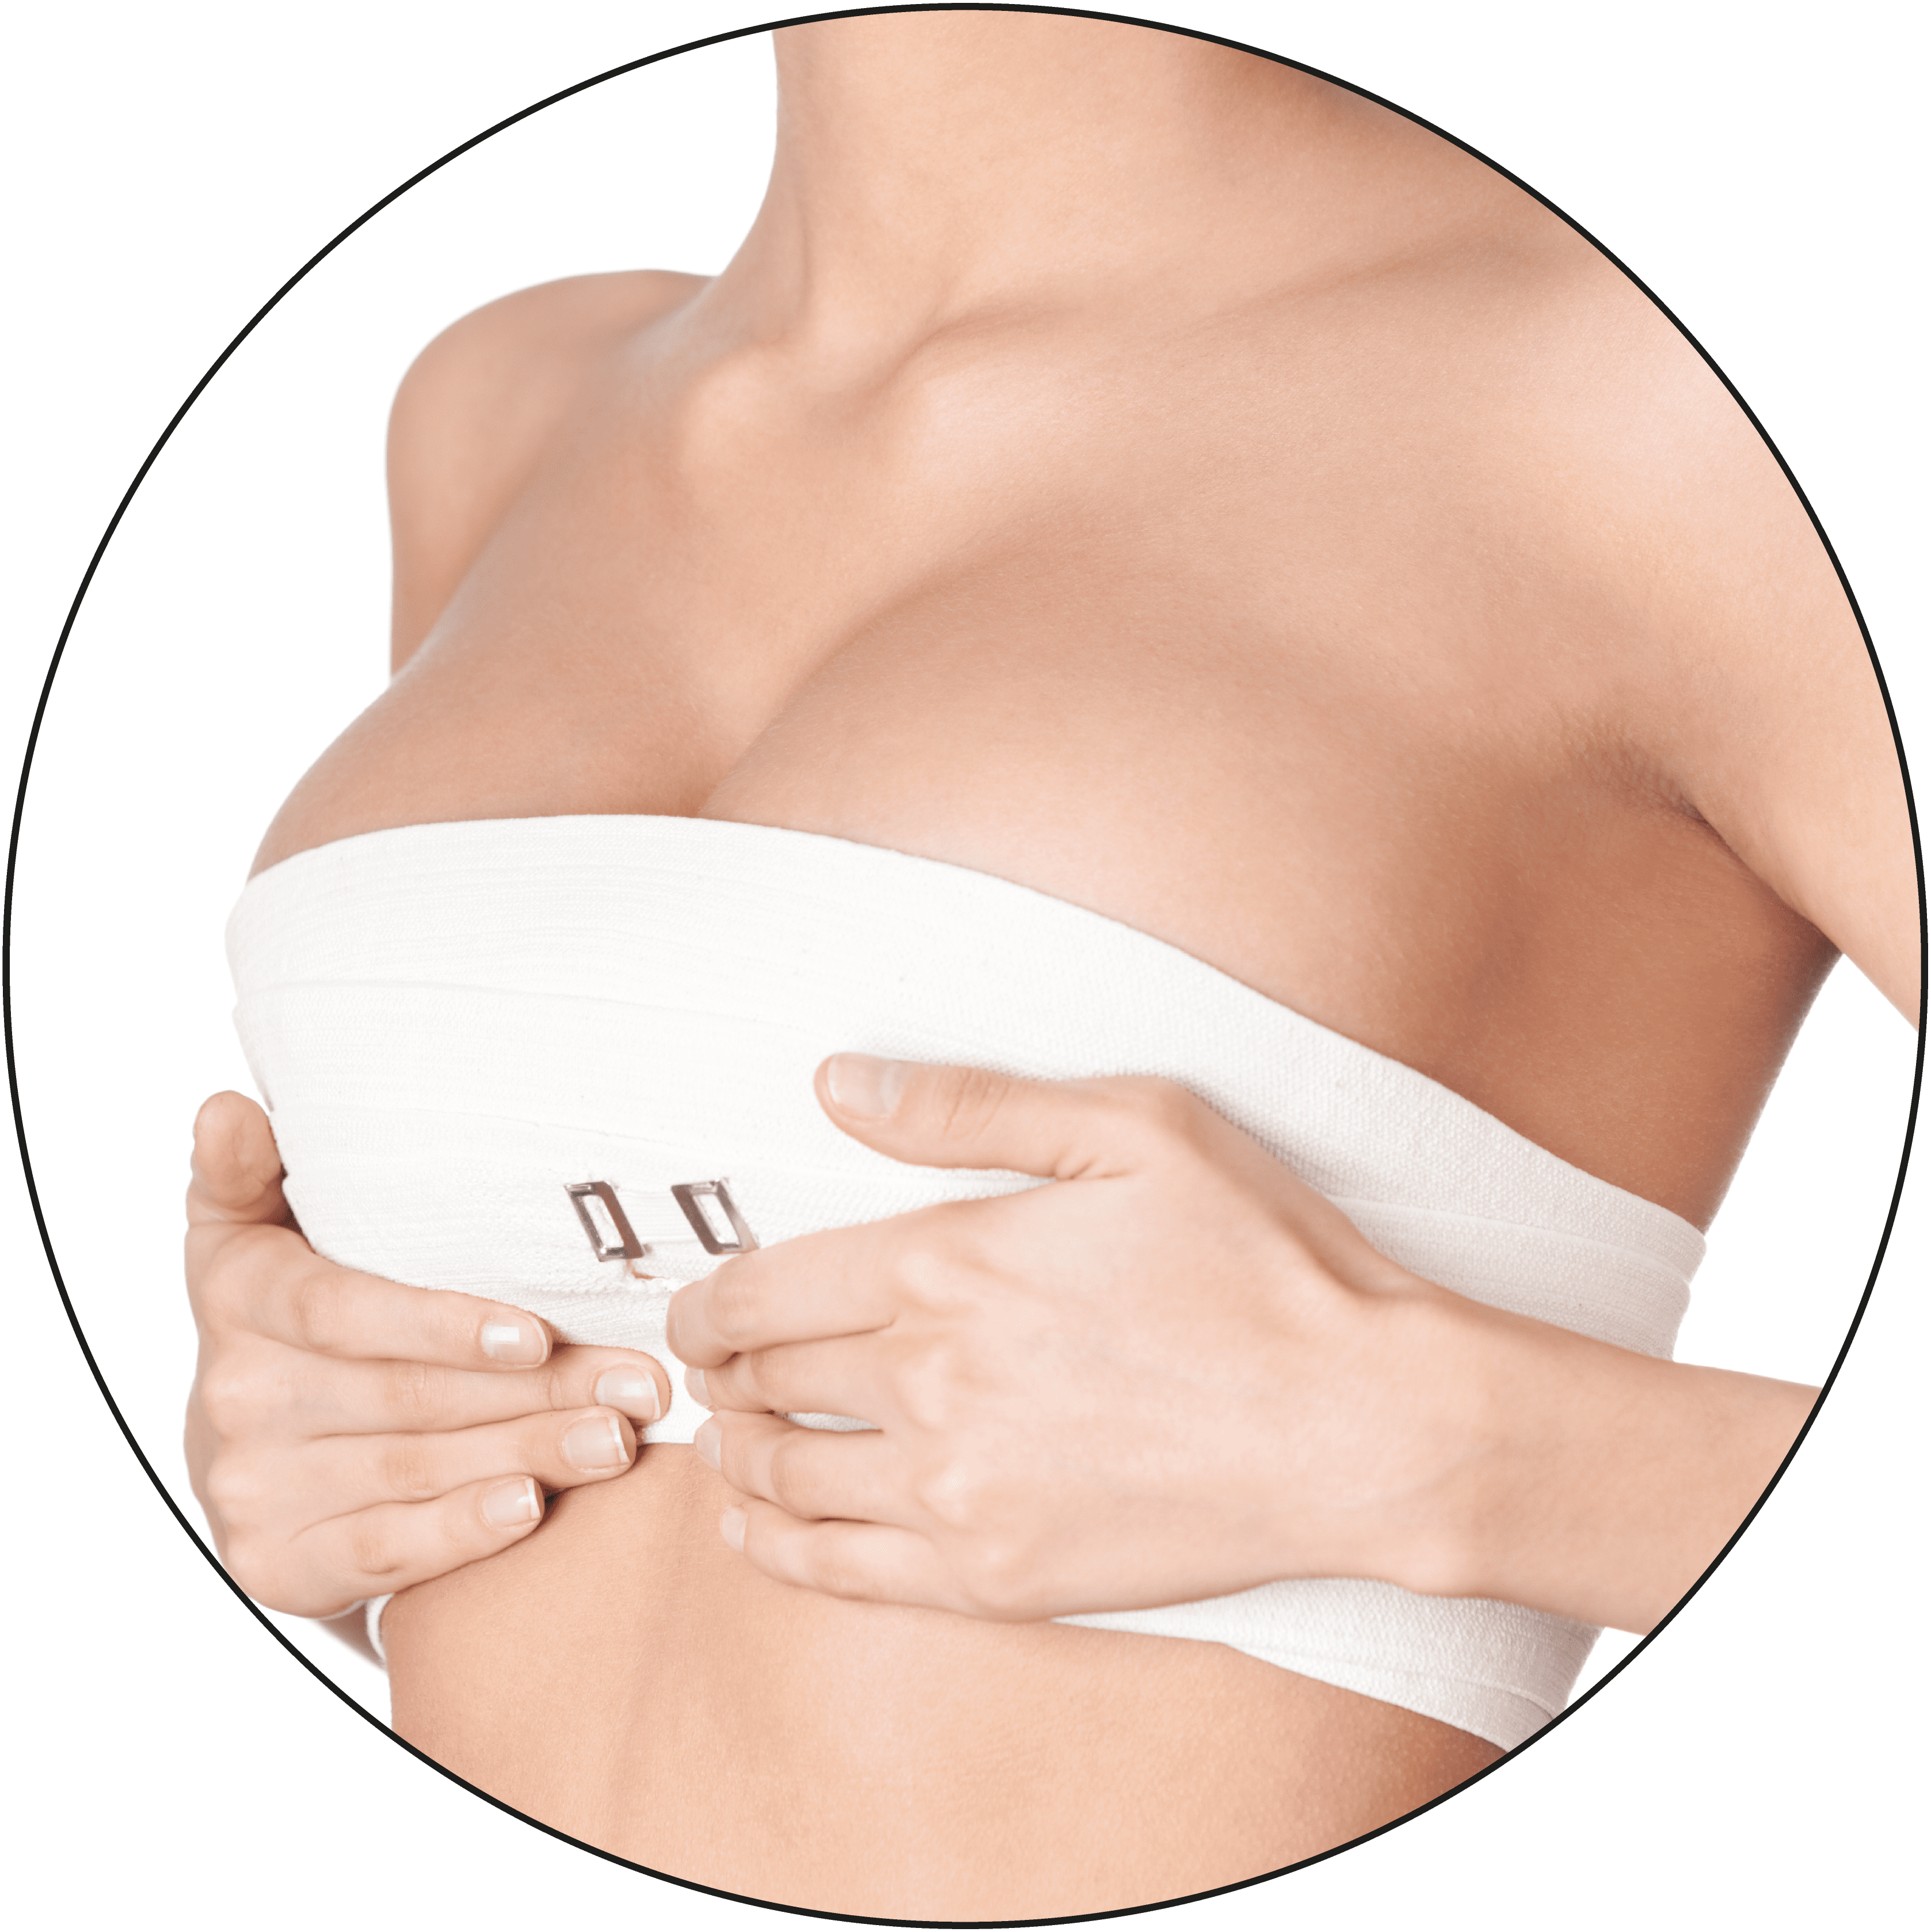 Amaira Med Spa - The best spa in Las Olas, fl - Medical spa treatment - Breast